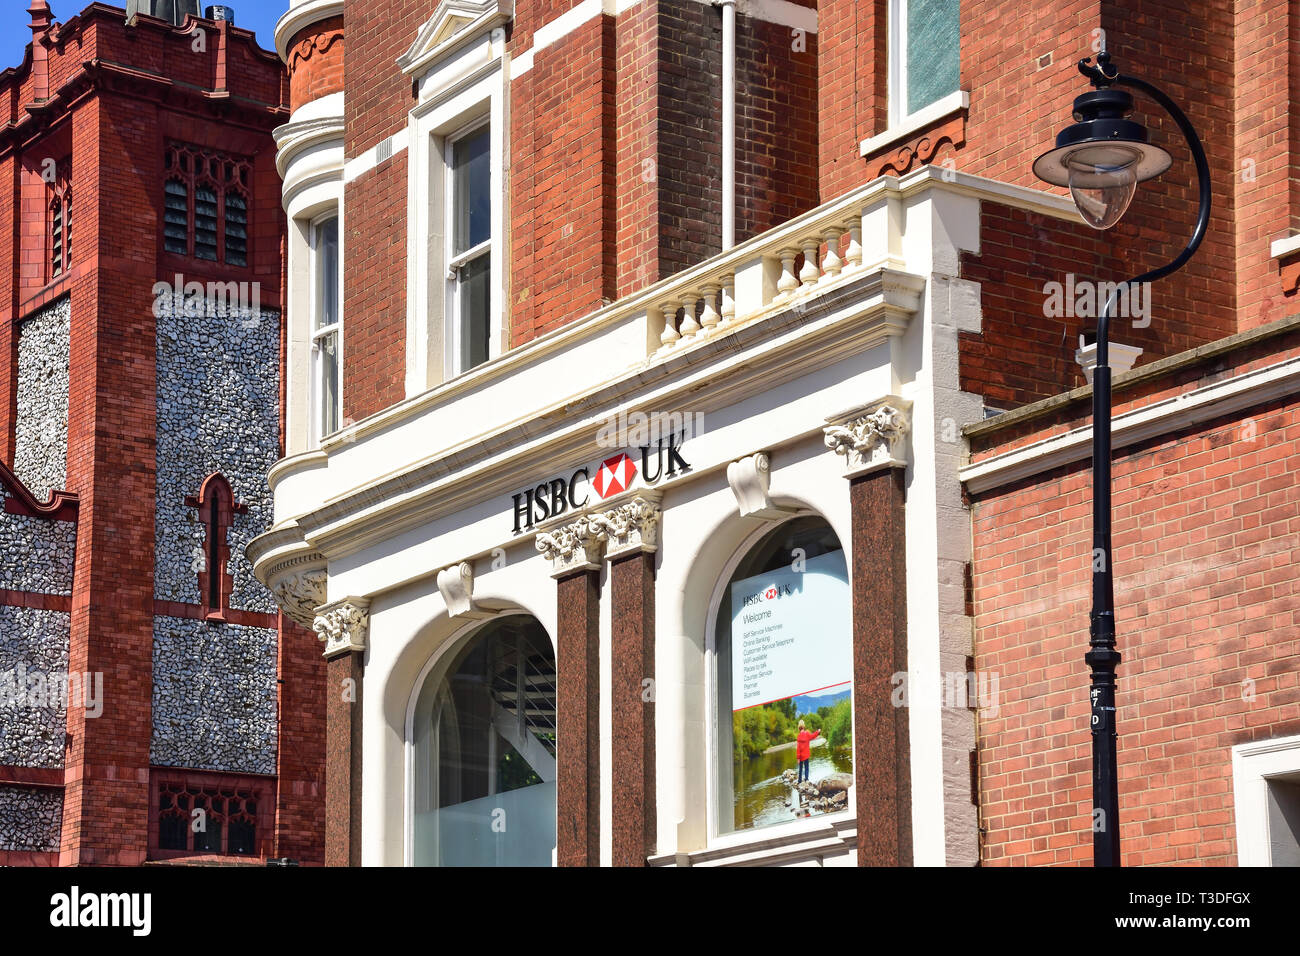 HSBC Bank, Muswell Hill Broadway, Muswell Hill, London Borough of Haringey, Greater London, England, United Kingdom Stock Photo